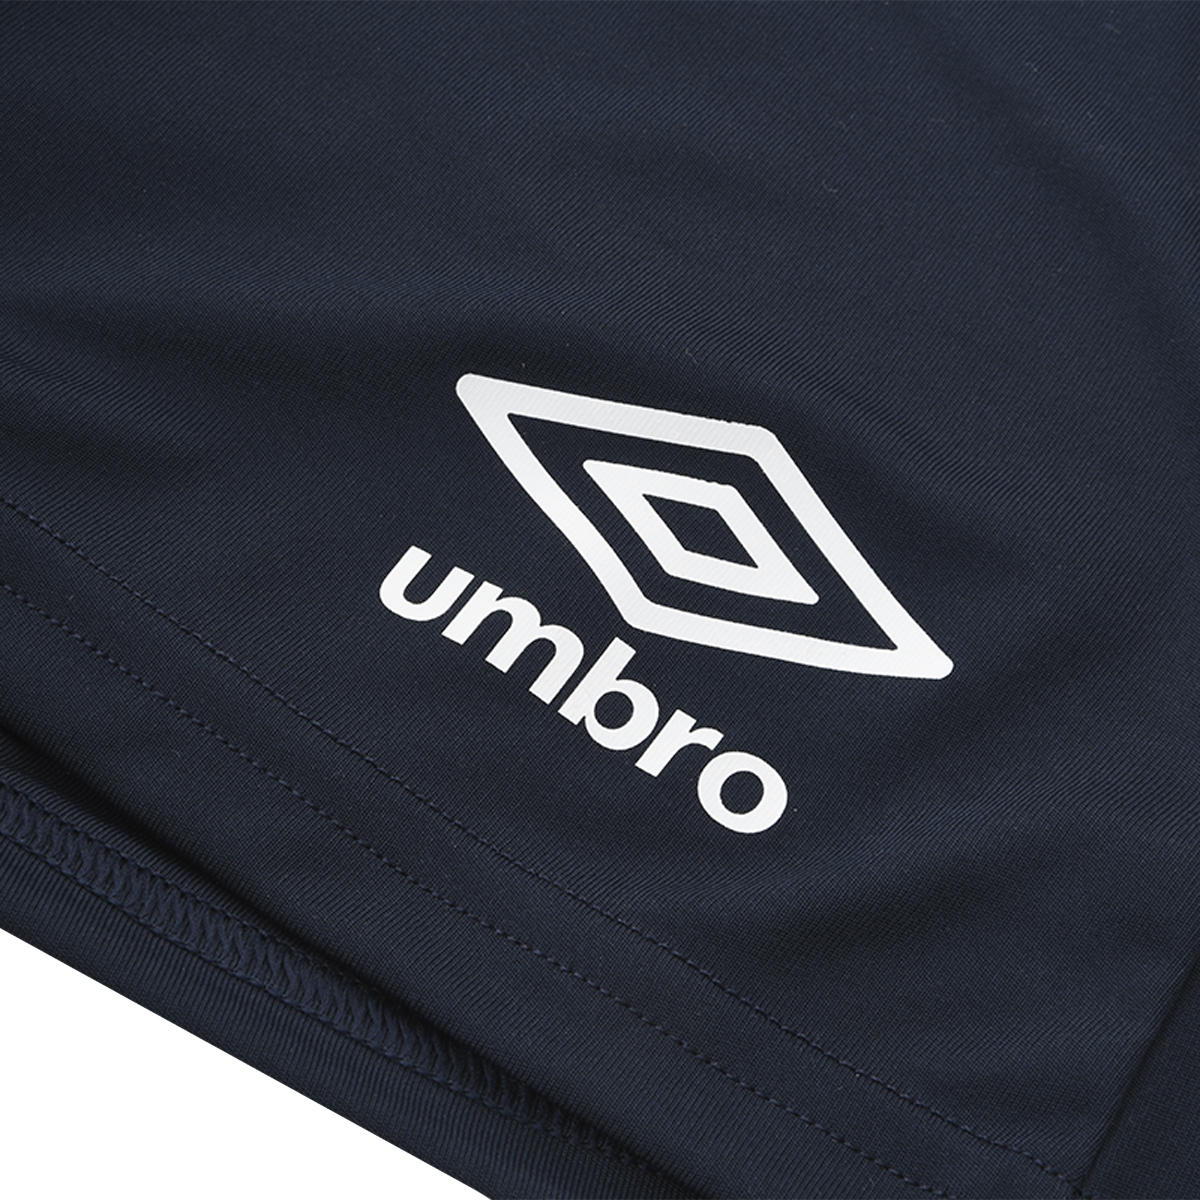 Short Umbro Letters Ar 2022 Hombre,  image number null